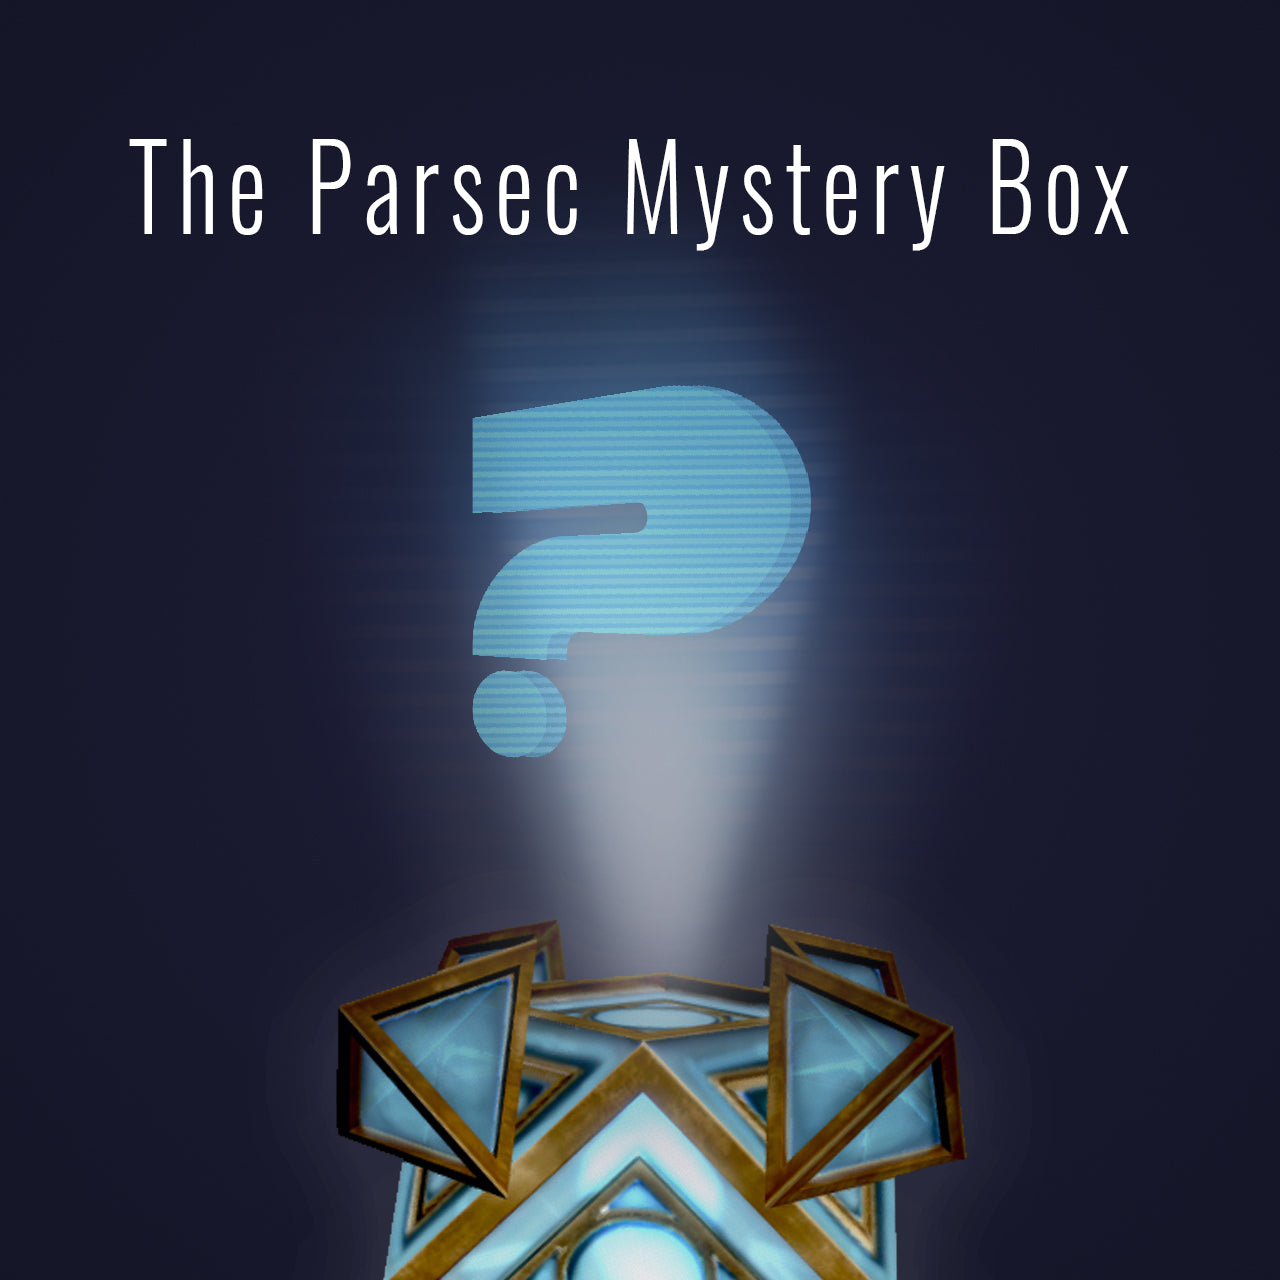 The Parsec Mystery Box